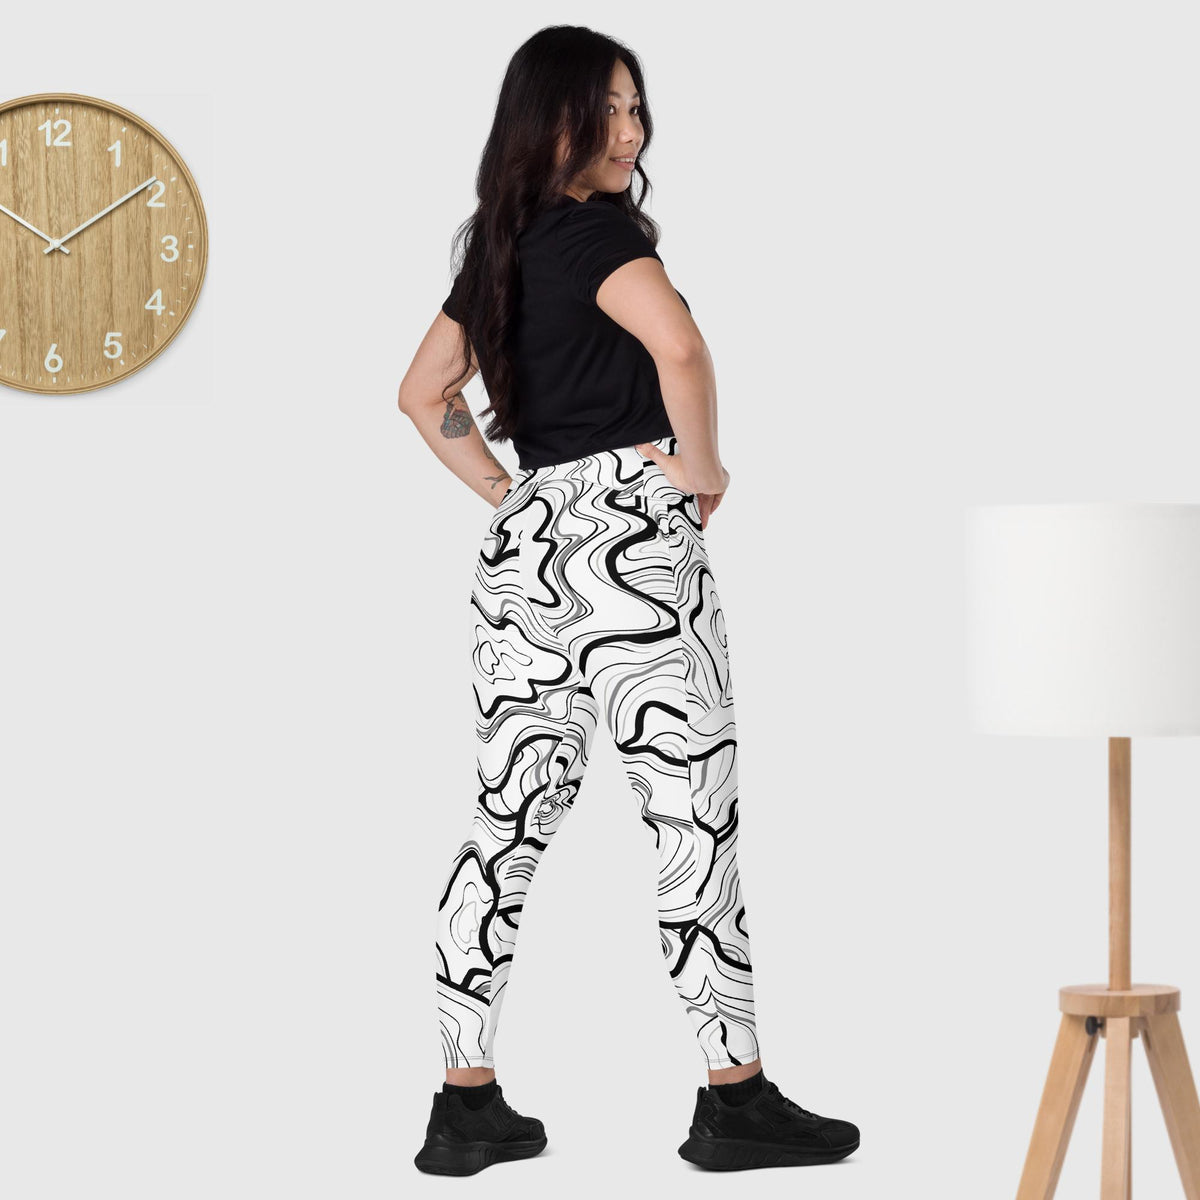 Black Fitness Leggings with Phone Pocket - Revive Wear     Black fitness leggings with phone pocket provides maximum performance. The four-way stretch fabric moves with you while the side pockets keep your phone close. Shop today.